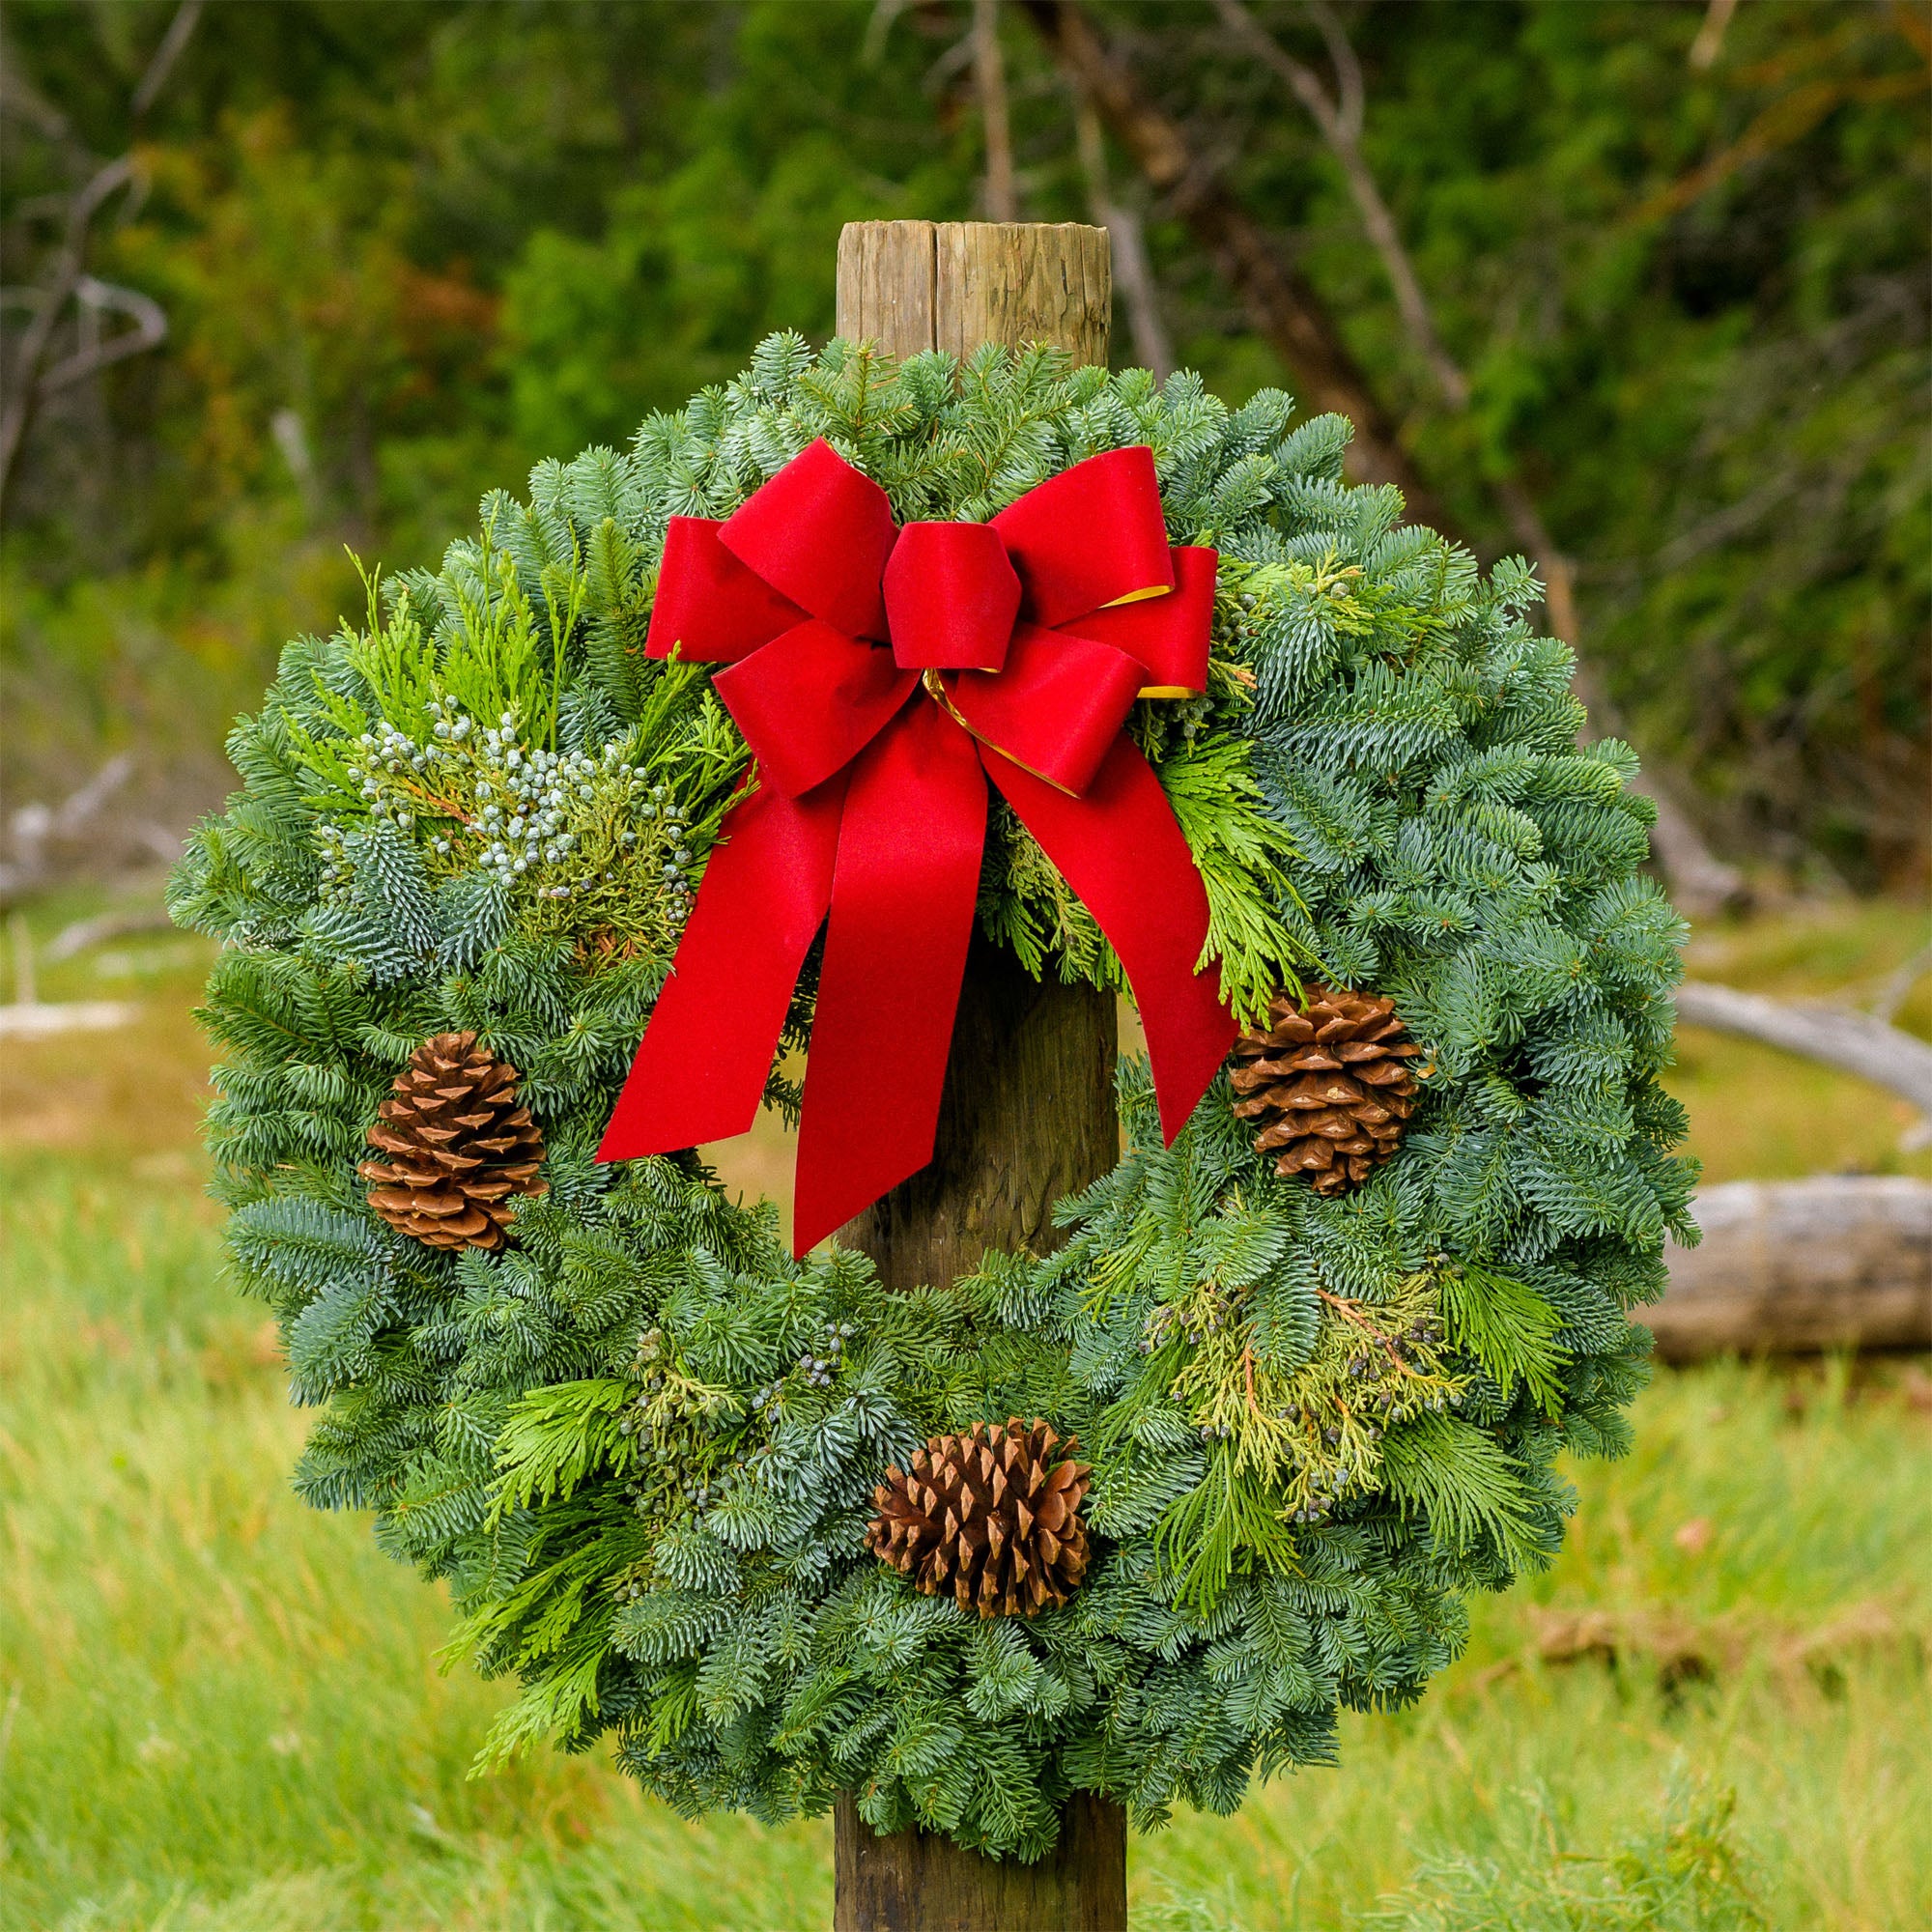 Christmas wreath made of fir, pine, cedar and juniper with pine cones and a gold-backed red velveteen bow on wood post